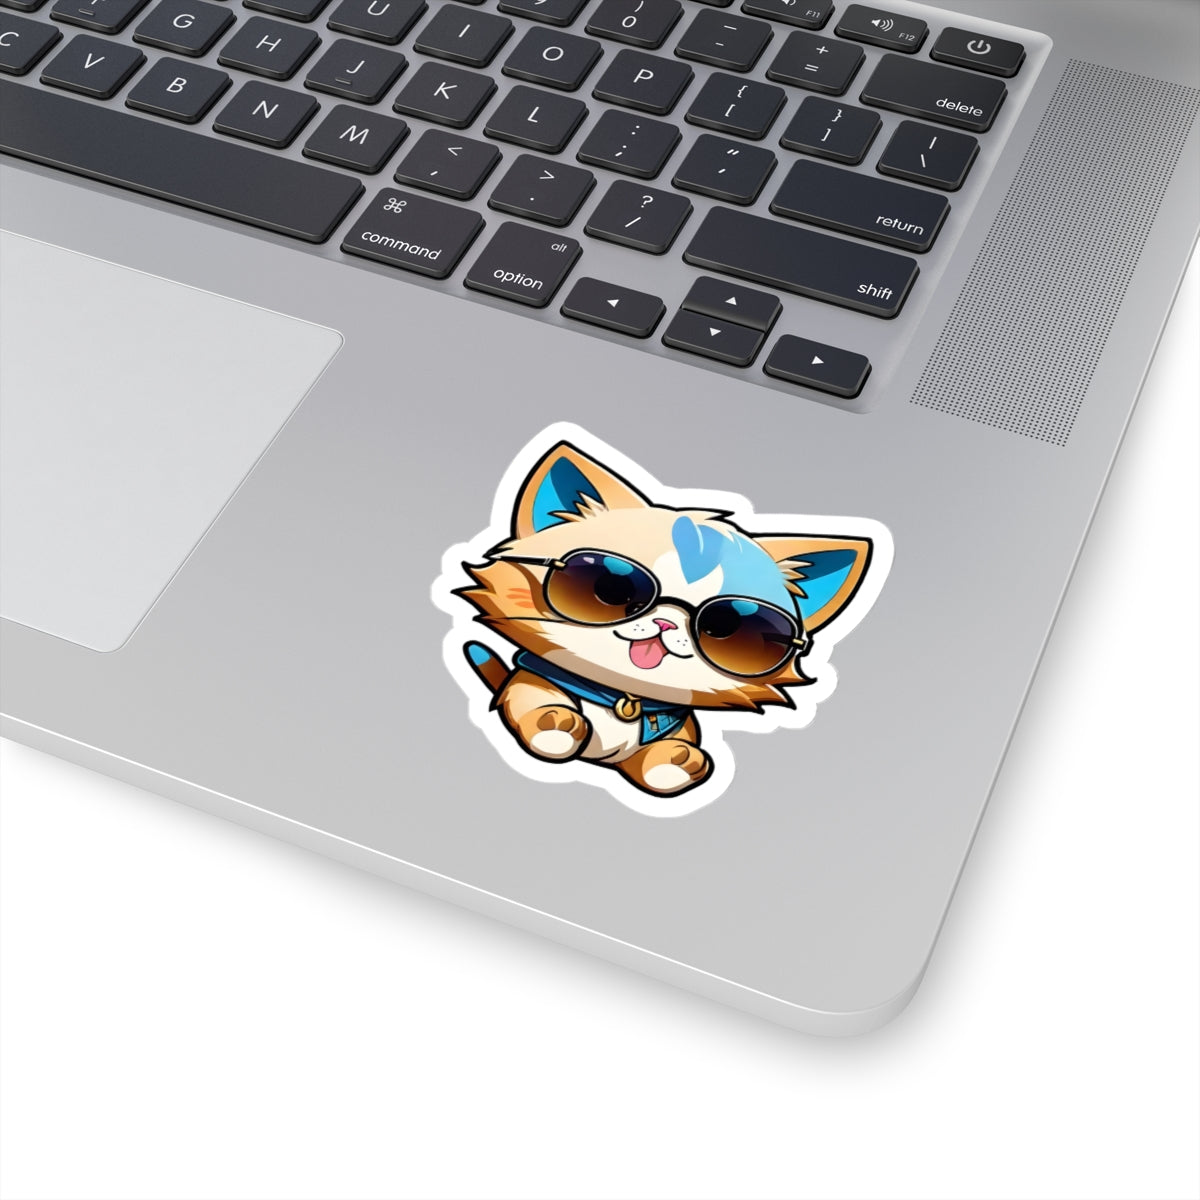 Adorable Spectacles Kitten Decal Sticker | Sticker Kitty for laptop